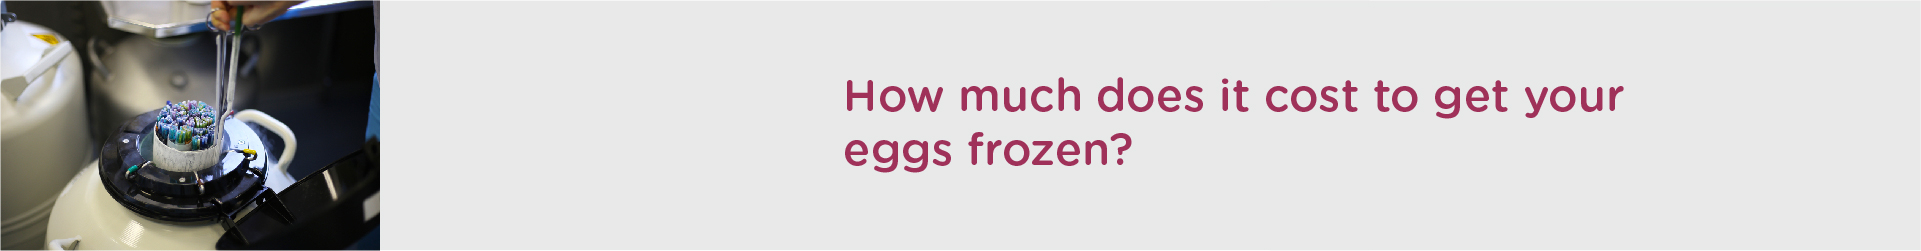 How much does it cost to get your eggs frozen?